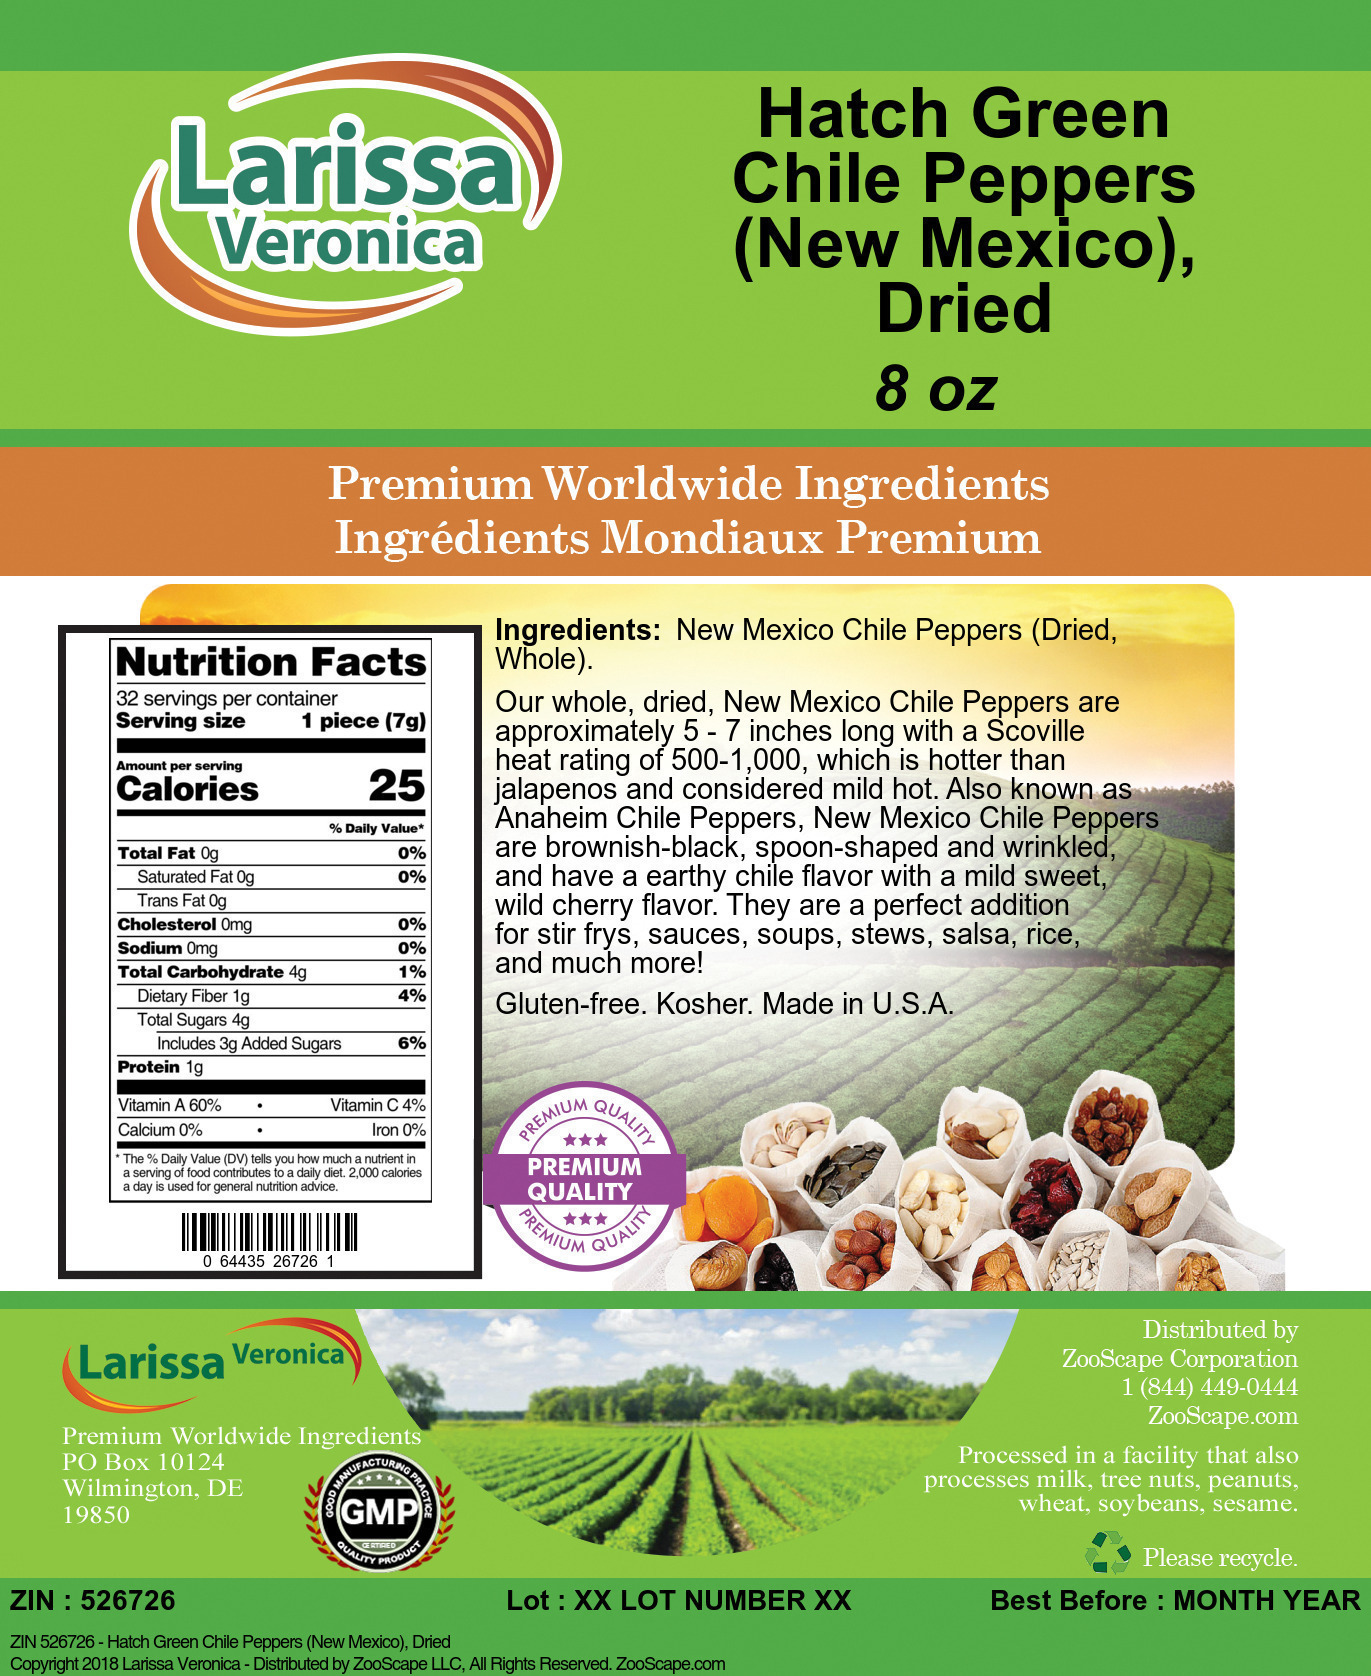 Hatch Green Chile Peppers (New Mexico), Dried - Label